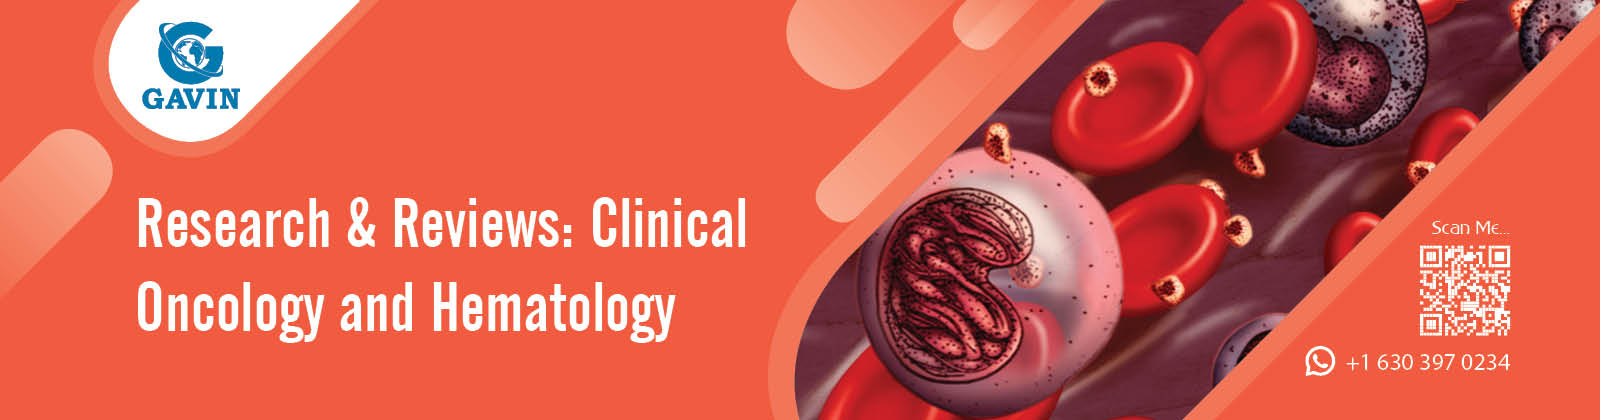 Research & Reviews: Clinical Oncology and Hematology